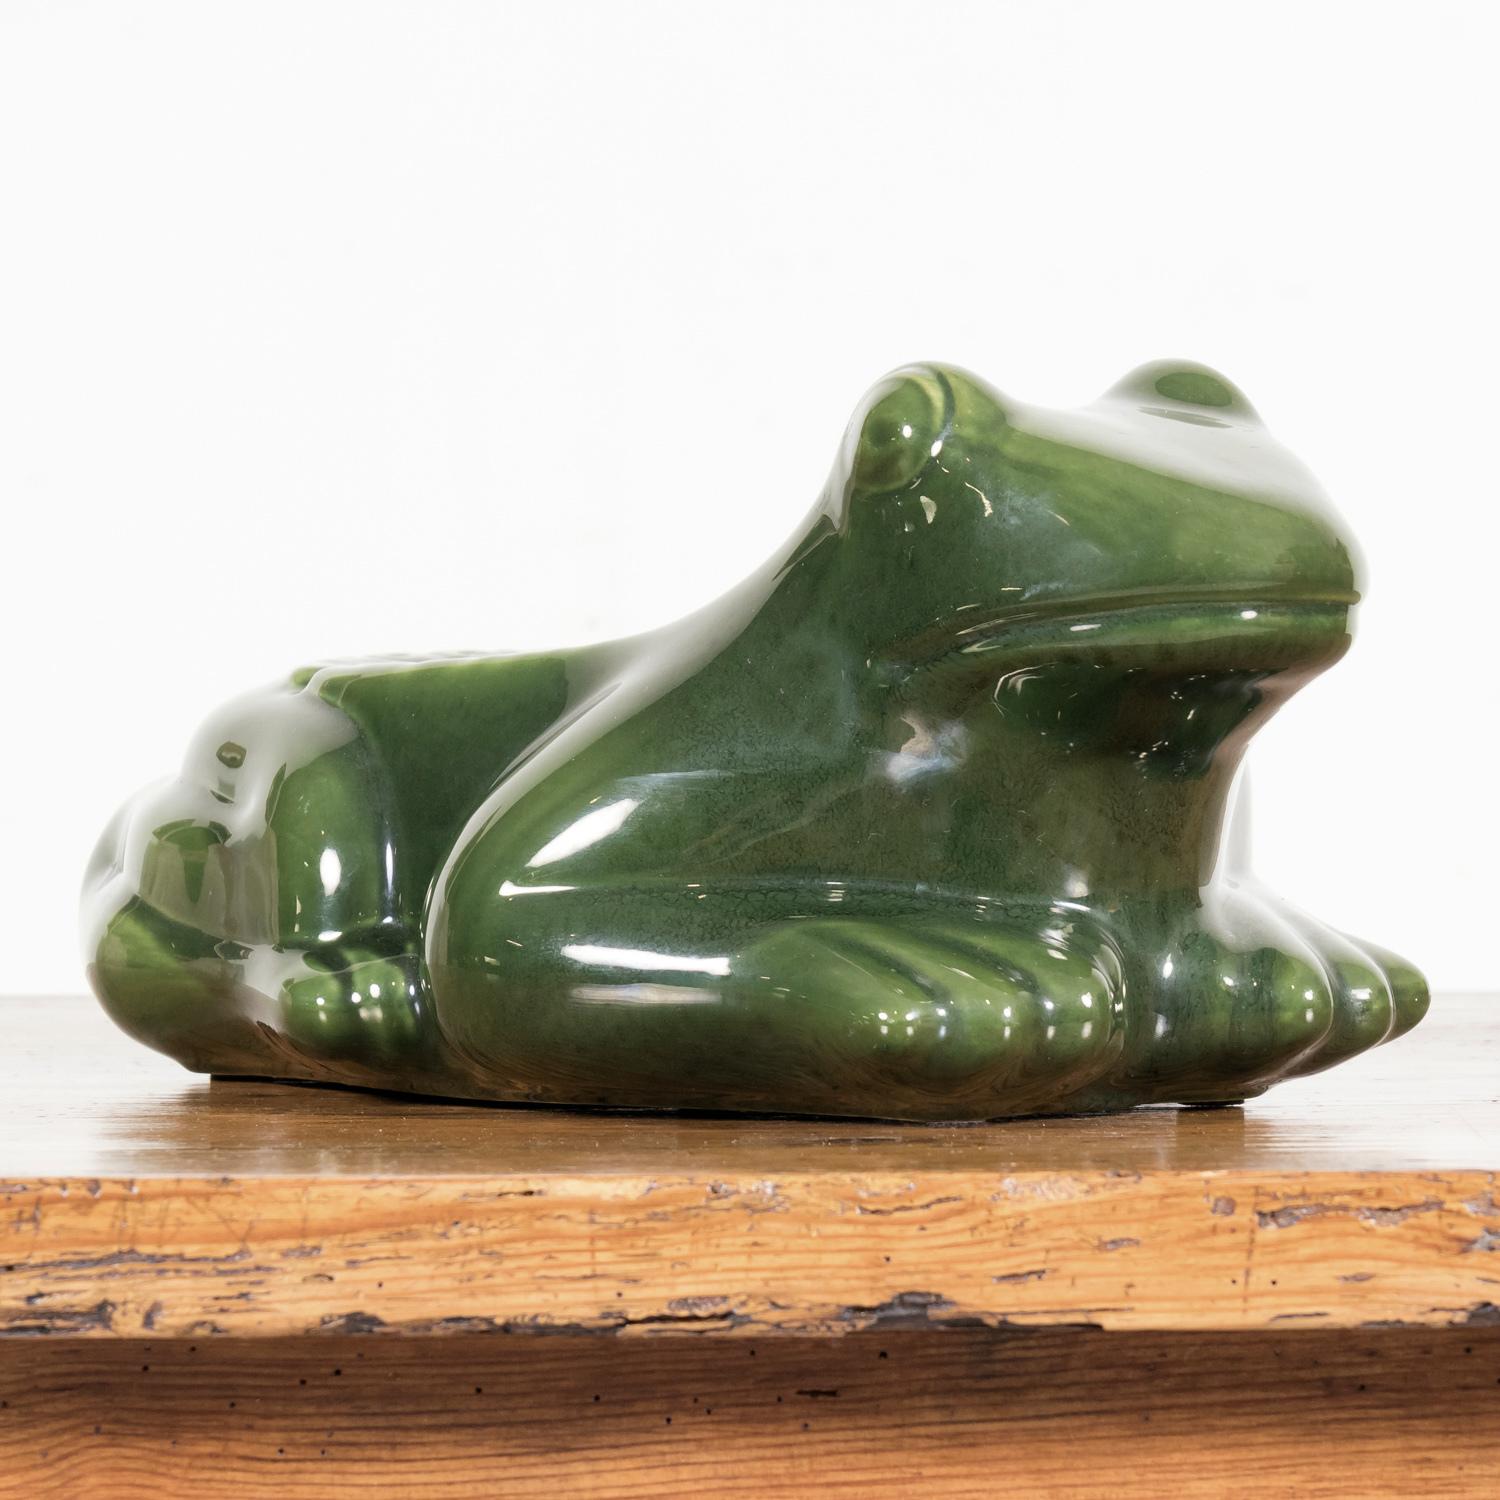 A large vintage mid-century French l'HERITIER GUYOT DIJON advertising ashtray in the shape of a frog in green enameled ceramic, circa 1950's. An iconic figure in the history of French bistros, the ceramic grenouilles or frogs adorned all the tables